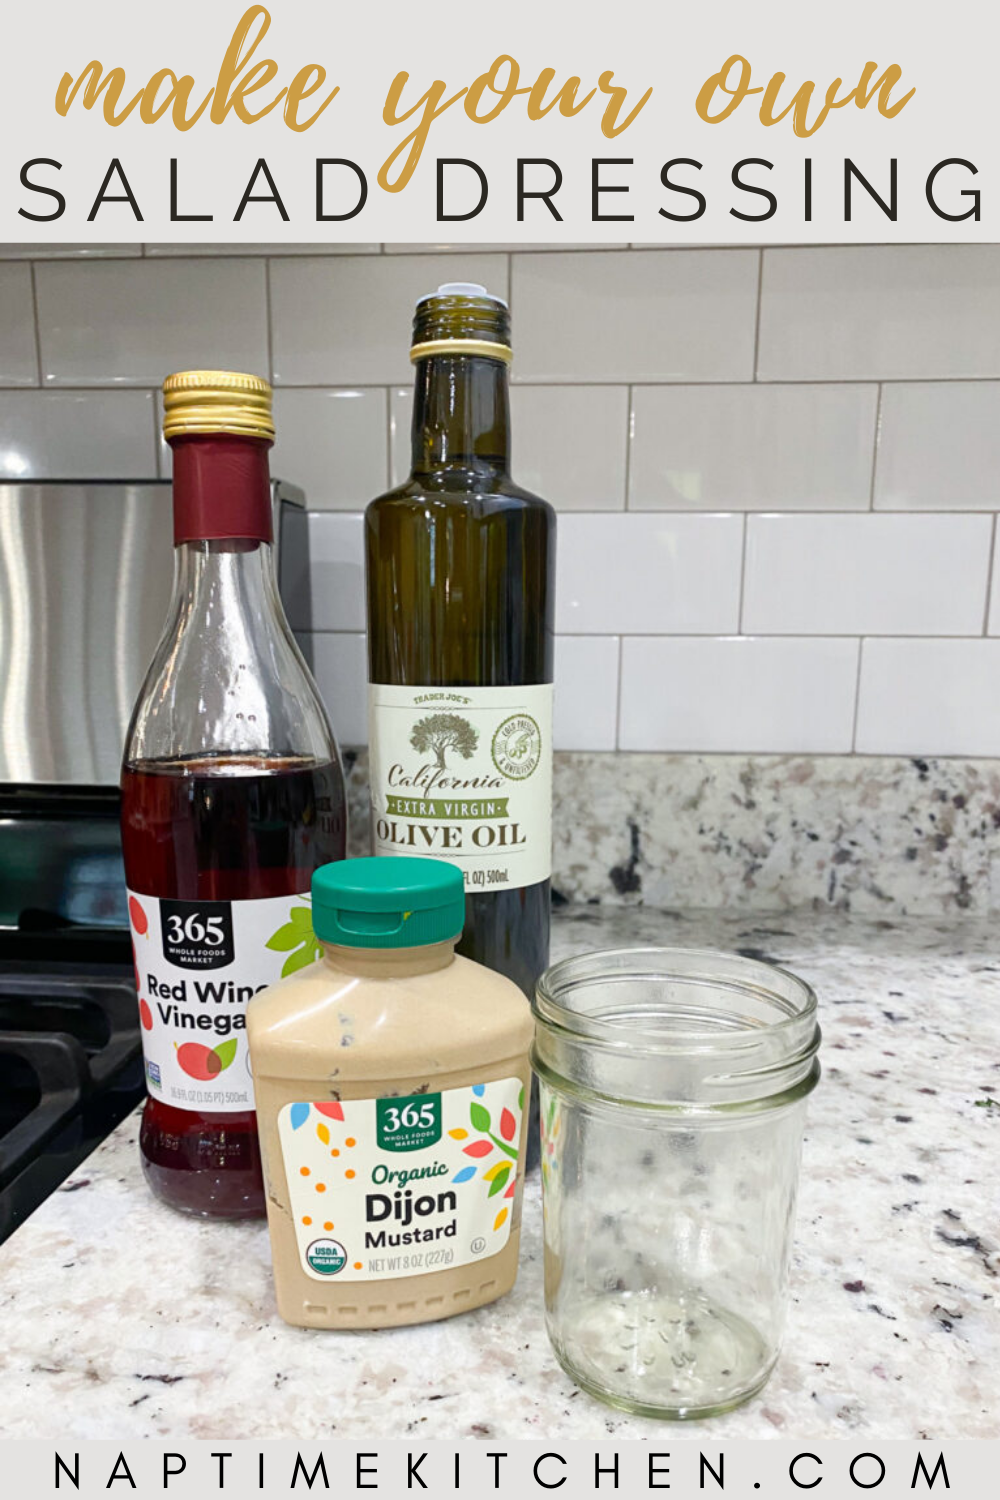 Making Your Own Salad Dressing